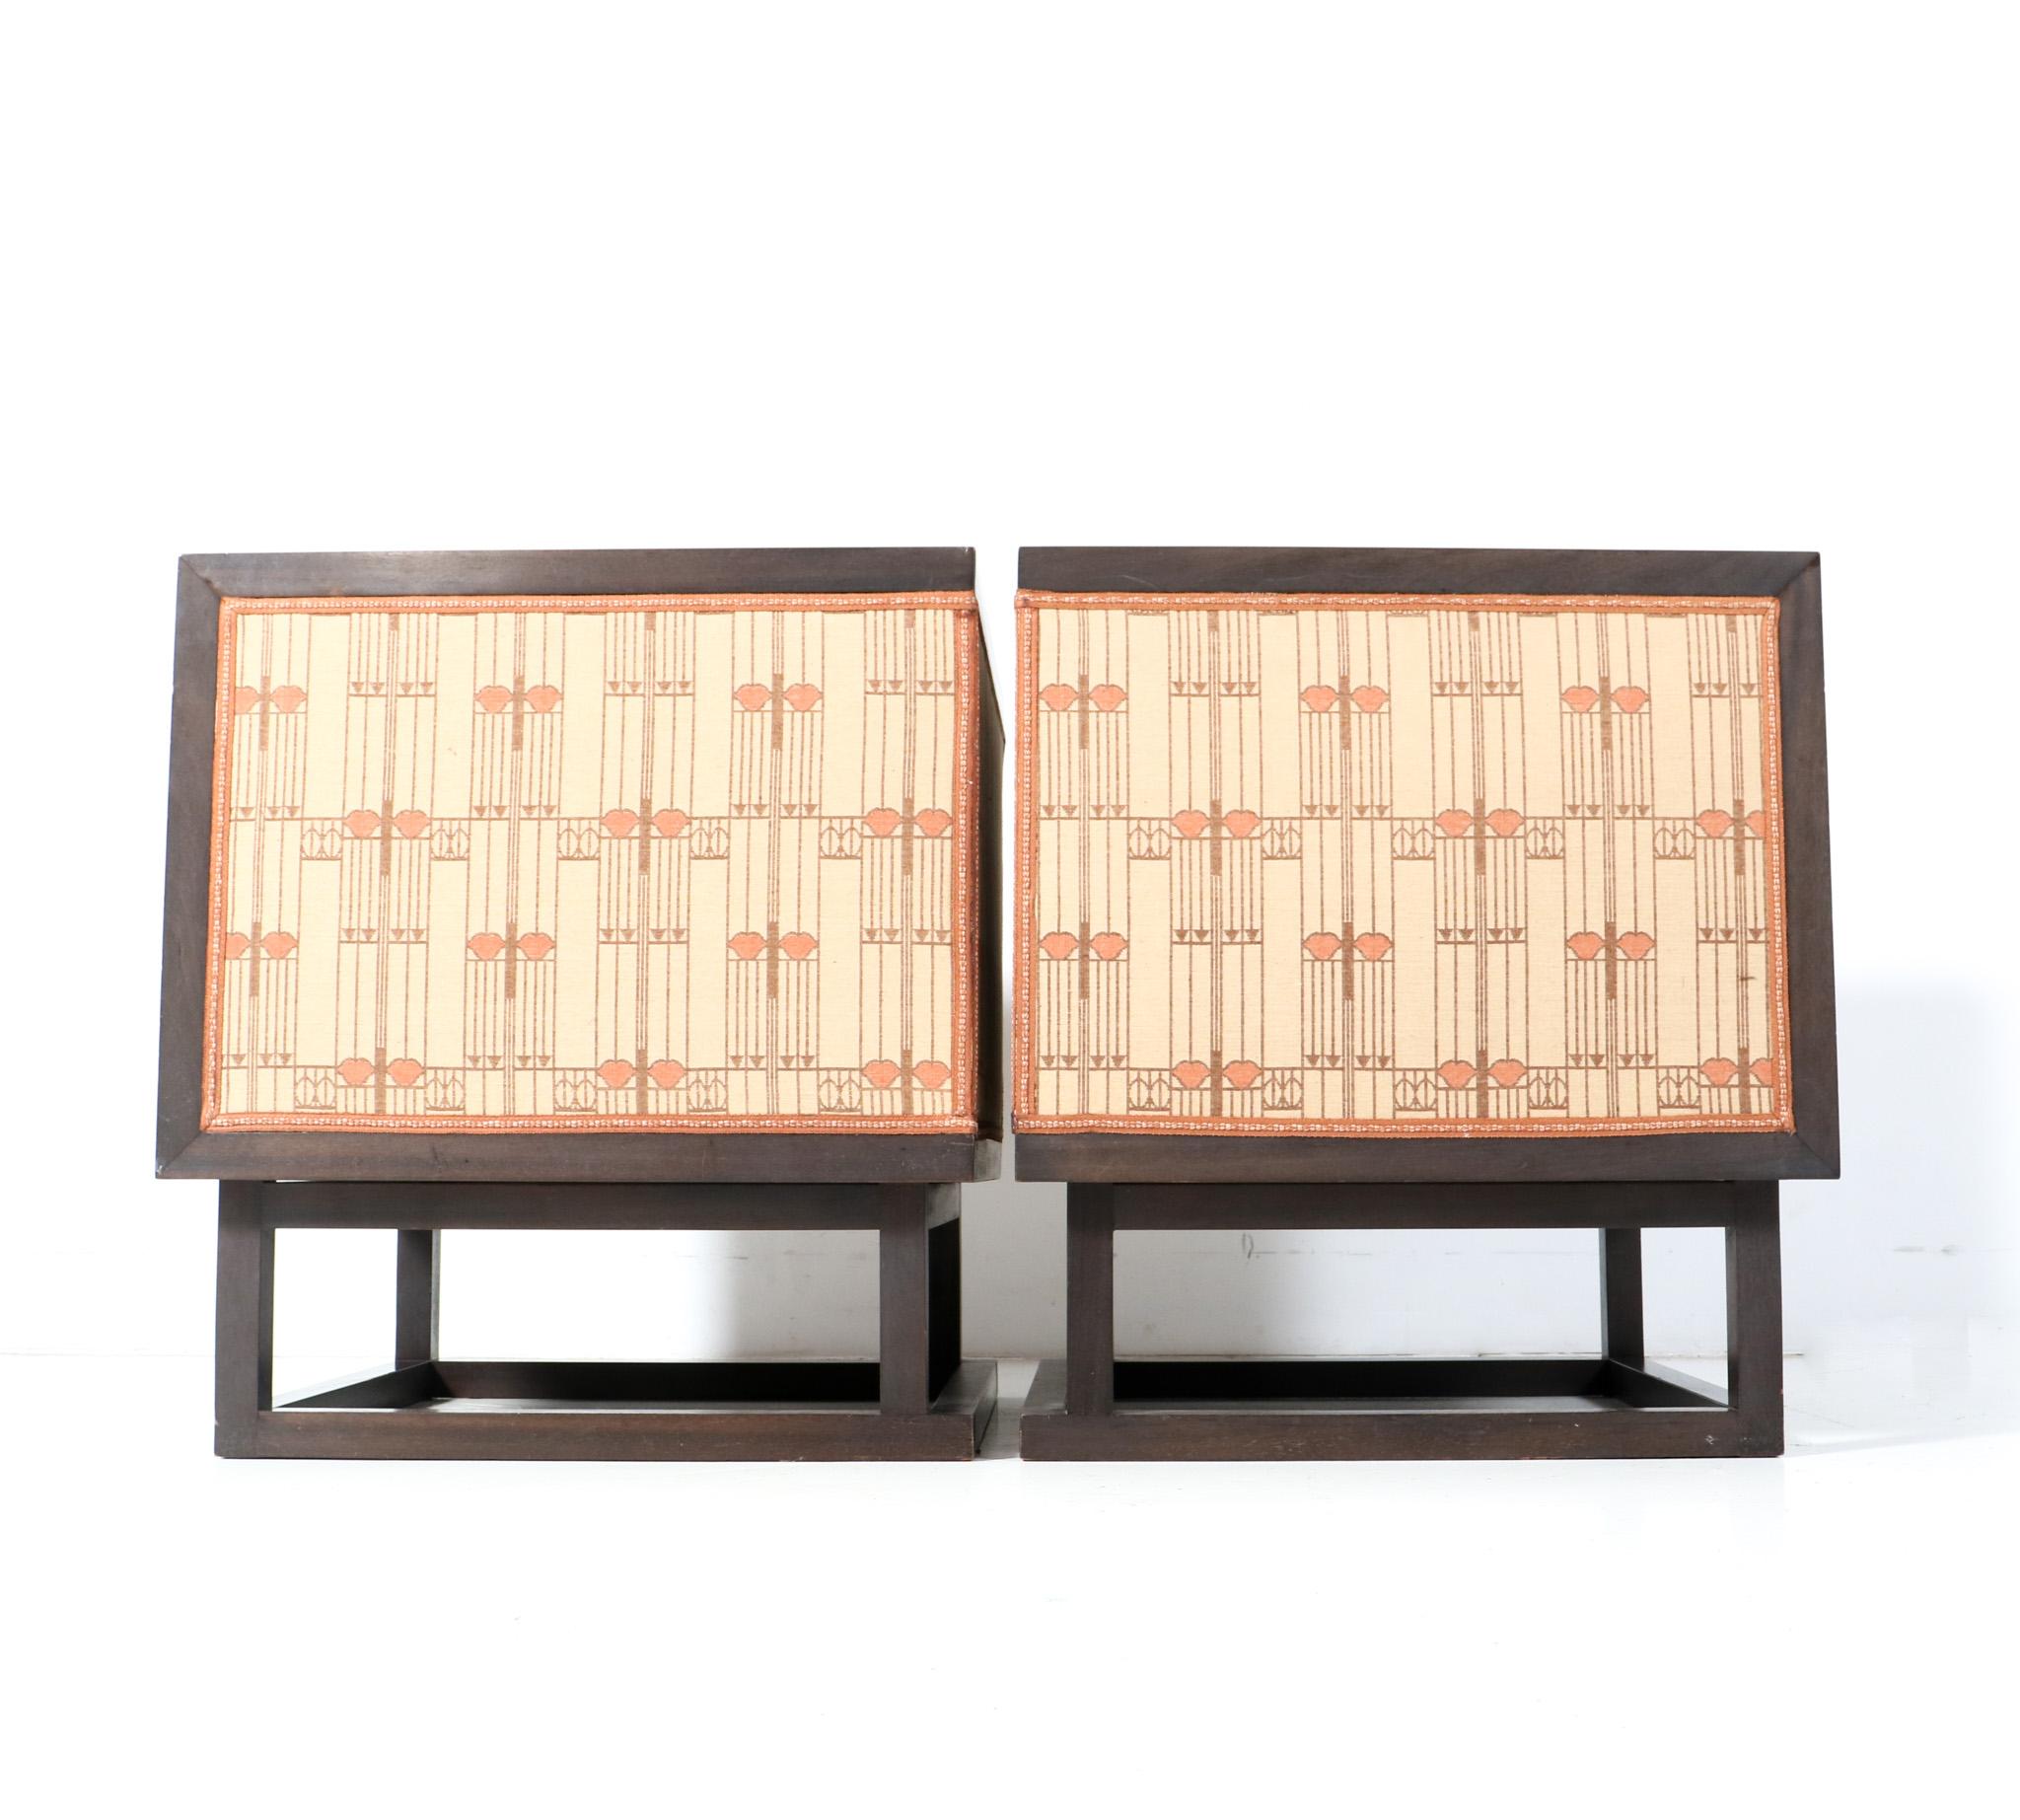 Fabric Pair of Vienna Secession Cabinet Chairs by Josef Hoffmann for Wittmann, 1903